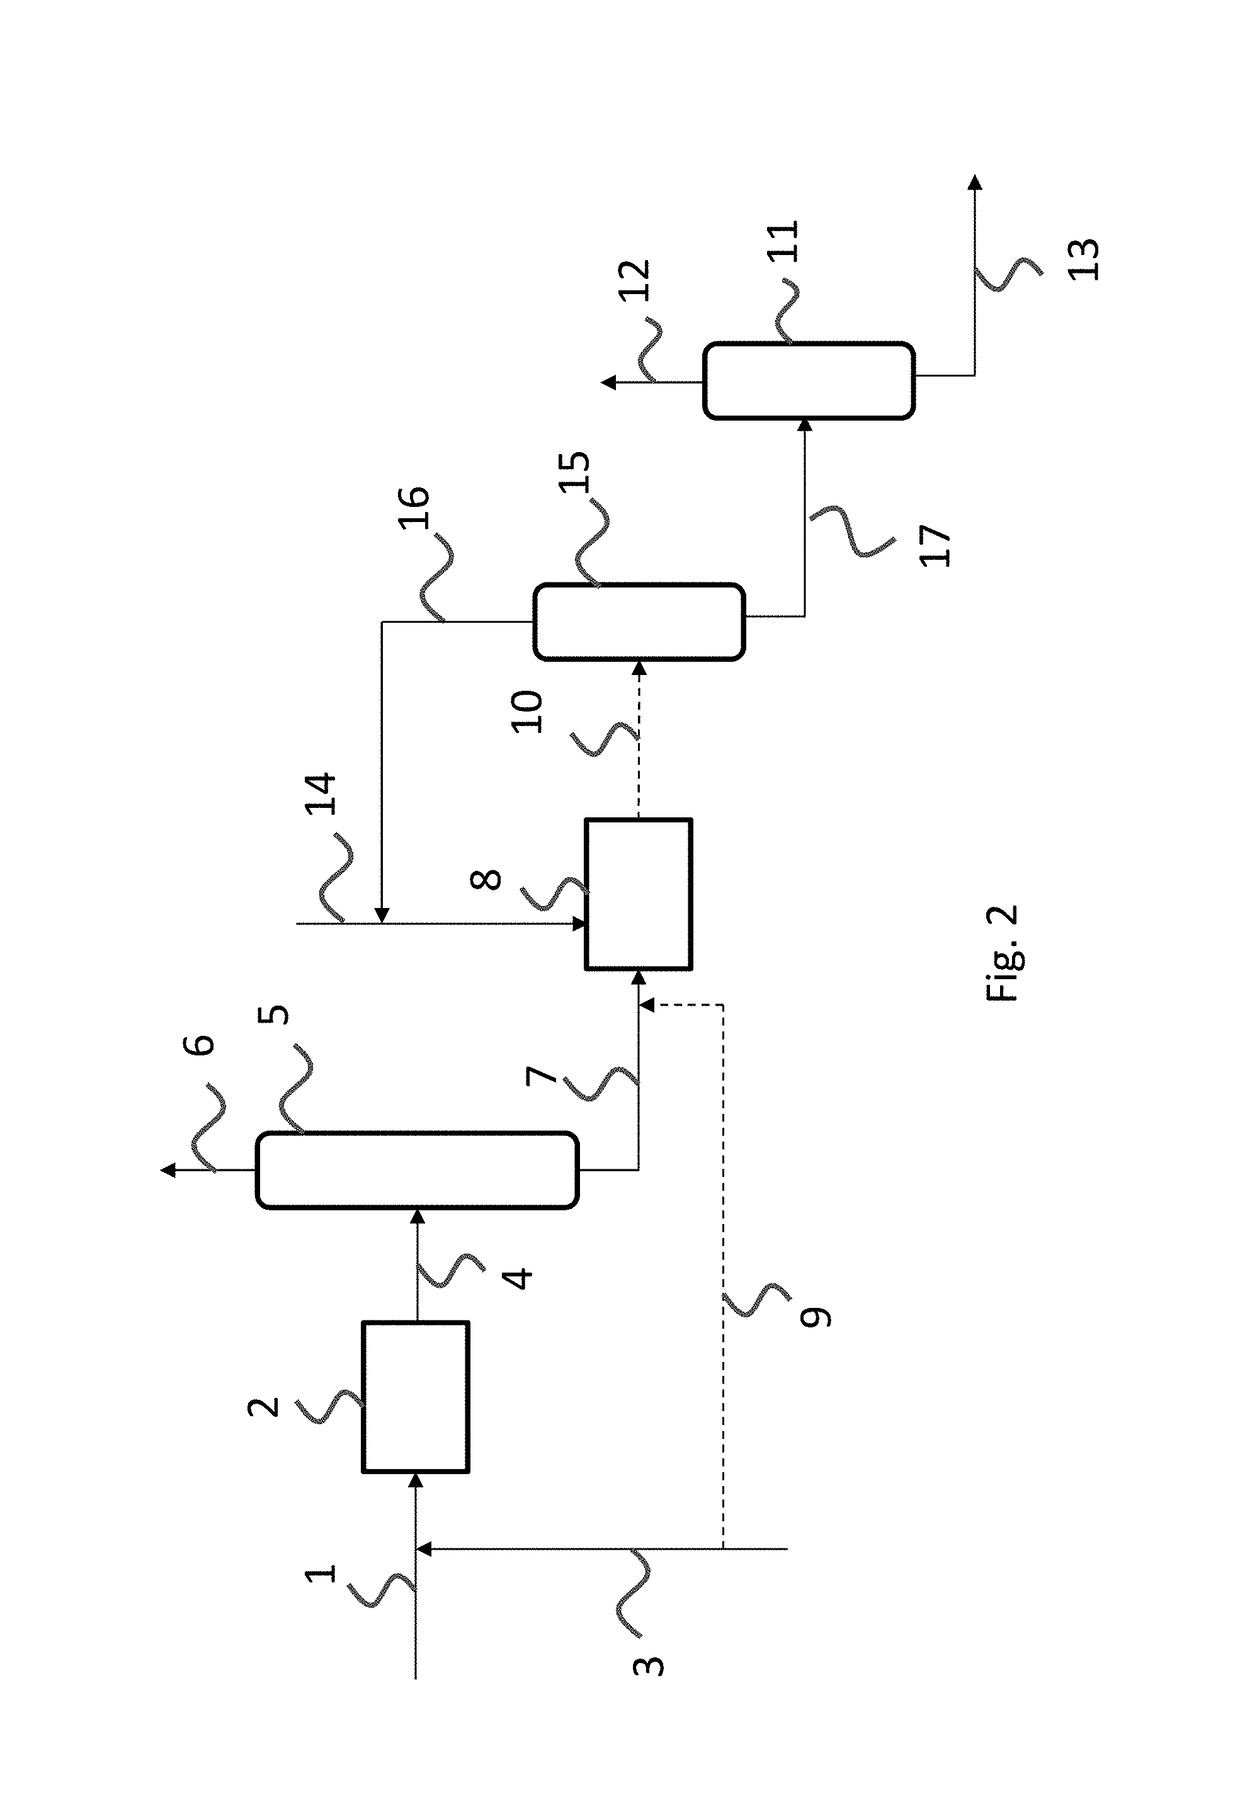 Process for producing a gasoline with a low sulphur and mercaptans content